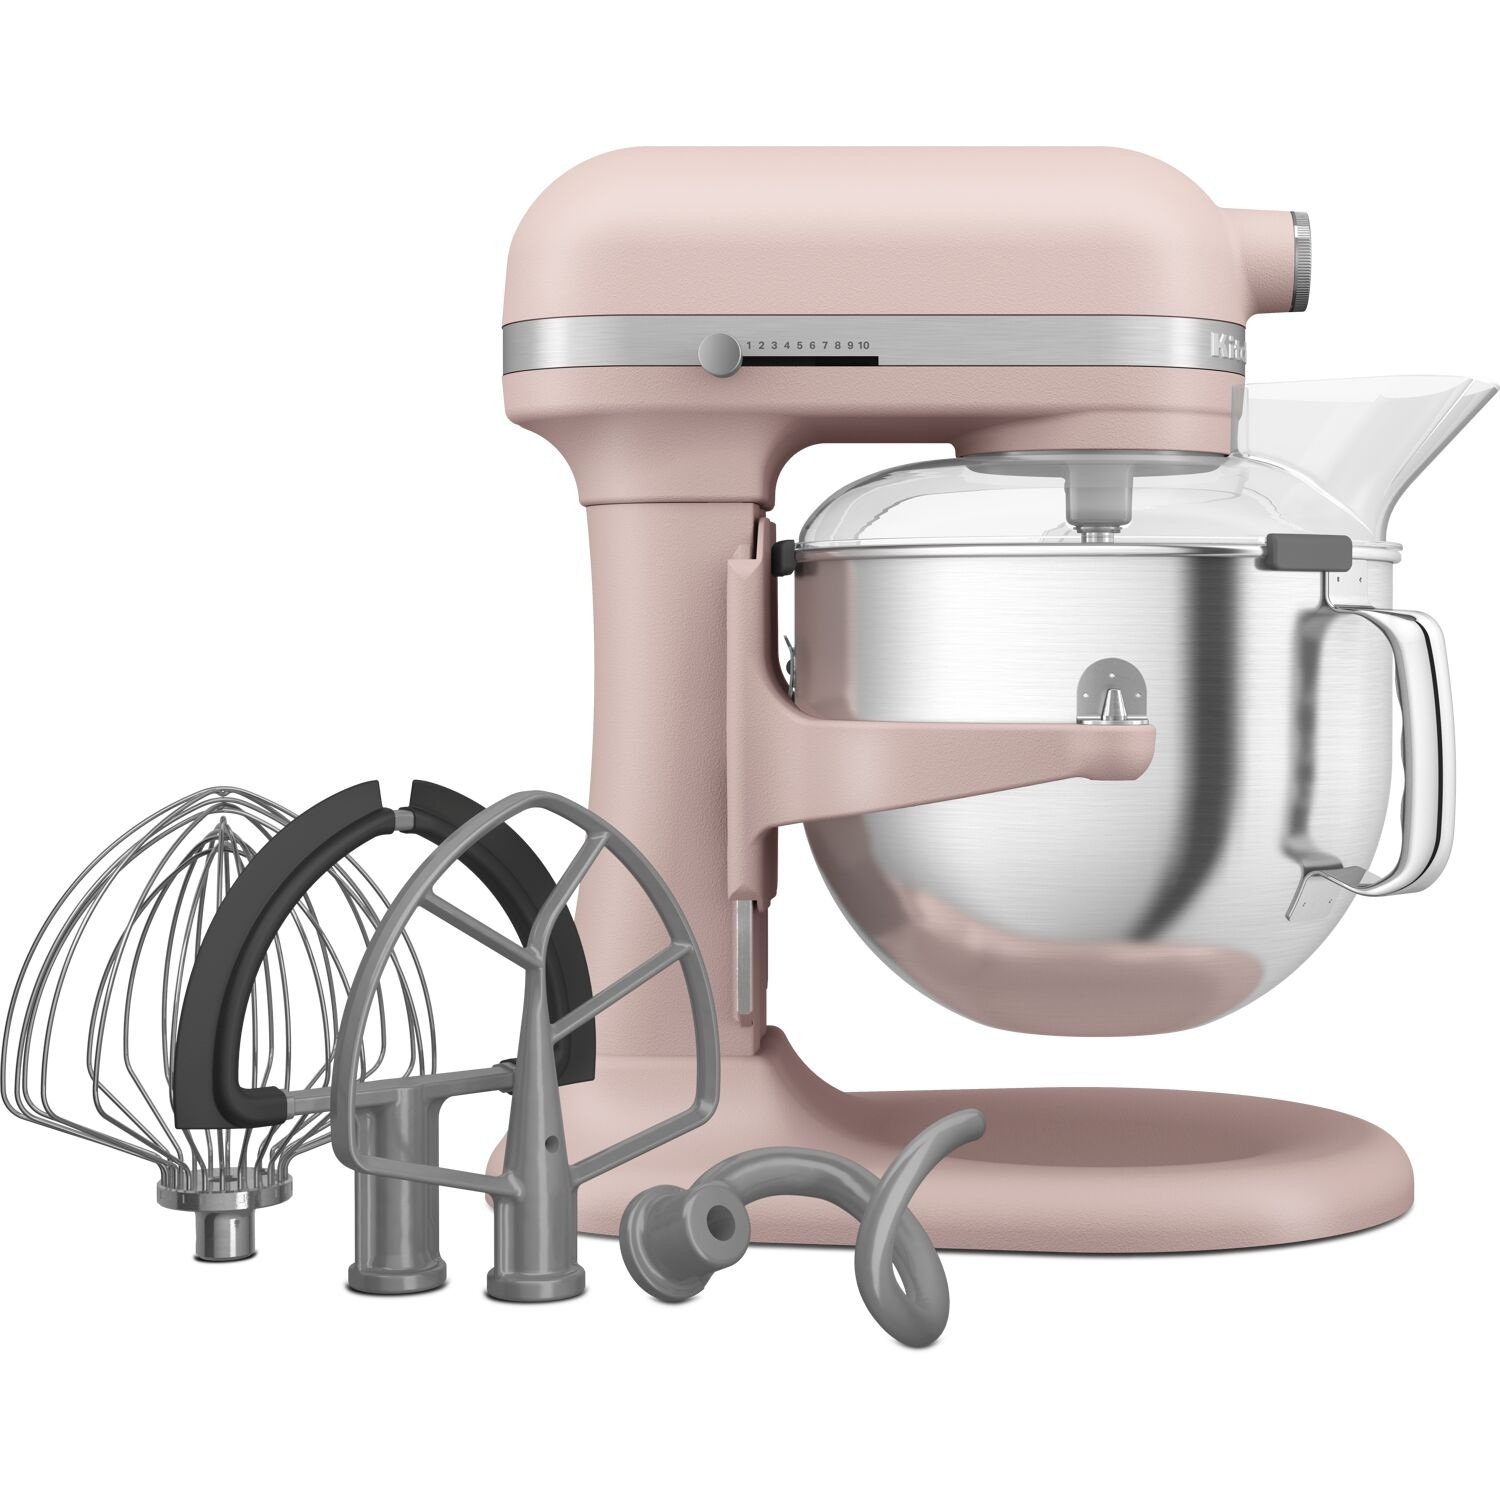 https://ak1.ostkcdn.com/images/products/is/images/direct/abea519f5585b121e0b4473852a5bb959a679cc0/KitchenAid-7-Qt.-Bowl-Lift-Stand-Mixer-in-Feather-Pink.jpg